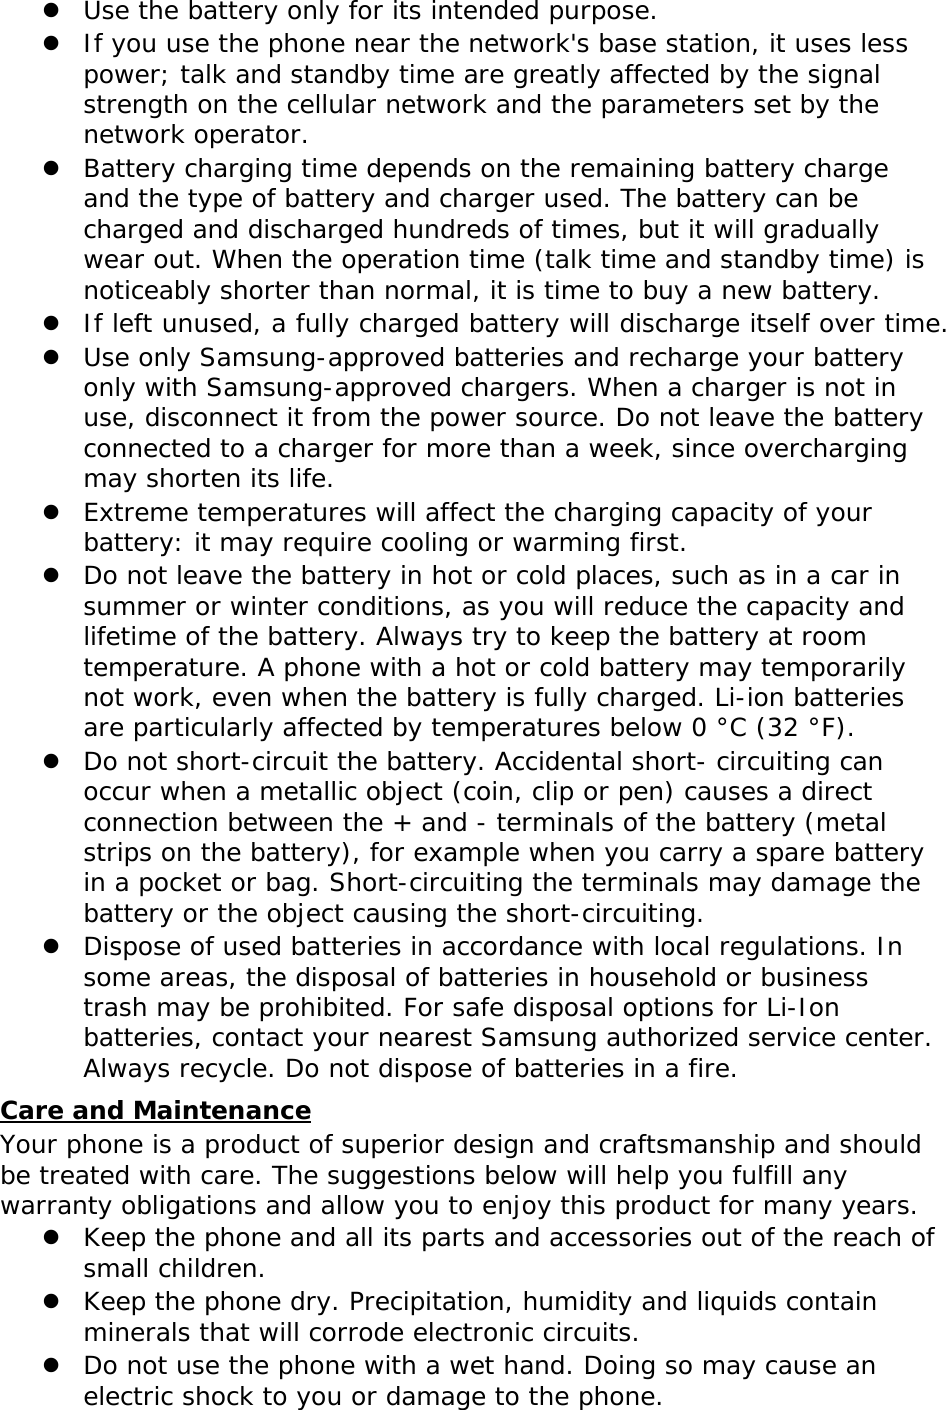  Use the battery only for its intended purpose.  If you use the phone near the network&apos;s base station, it uses less power; talk and standby time are greatly affected by the signal strength on the cellular network and the parameters set by the network operator.  Battery charging time depends on the remaining battery charge and the type of battery and charger used. The battery can be charged and discharged hundreds of times, but it will gradually wear out. When the operation time (talk time and standby time) is noticeably shorter than normal, it is time to buy a new battery.  If left unused, a fully charged battery will discharge itself over time.  Use only Samsung-approved batteries and recharge your battery only with Samsung-approved chargers. When a charger is not in use, disconnect it from the power source. Do not leave the battery connected to a charger for more than a week, since overcharging may shorten its life.  Extreme temperatures will affect the charging capacity of your battery: it may require cooling or warming first.  Do not leave the battery in hot or cold places, such as in a car in summer or winter conditions, as you will reduce the capacity and lifetime of the battery. Always try to keep the battery at room temperature. A phone with a hot or cold battery may temporarily not work, even when the battery is fully charged. Li-ion batteries are particularly affected by temperatures below 0 °C (32 °F).  Do not short-circuit the battery. Accidental short- circuiting can occur when a metallic object (coin, clip or pen) causes a direct connection between the + and - terminals of the battery (metal strips on the battery), for example when you carry a spare battery in a pocket or bag. Short-circuiting the terminals may damage the battery or the object causing the short-circuiting.  Dispose of used batteries in accordance with local regulations. In some areas, the disposal of batteries in household or business trash may be prohibited. For safe disposal options for Li-Ion batteries, contact your nearest Samsung authorized service center. Always recycle. Do not dispose of batteries in a fire. Your phone is a product of superior design and craftsmanship and should be treated with care. The suggestions below will help you fulfill any warranty obligations and allow you to enjoy this product for many years. Care and Maintenance  Keep the phone and all its parts and accessories out of the reach of small children.  Keep the phone dry. Precipitation, humidity and liquids contain minerals that will corrode electronic circuits.  Do not use the phone with a wet hand. Doing so may cause an electric shock to you or damage to the phone. 